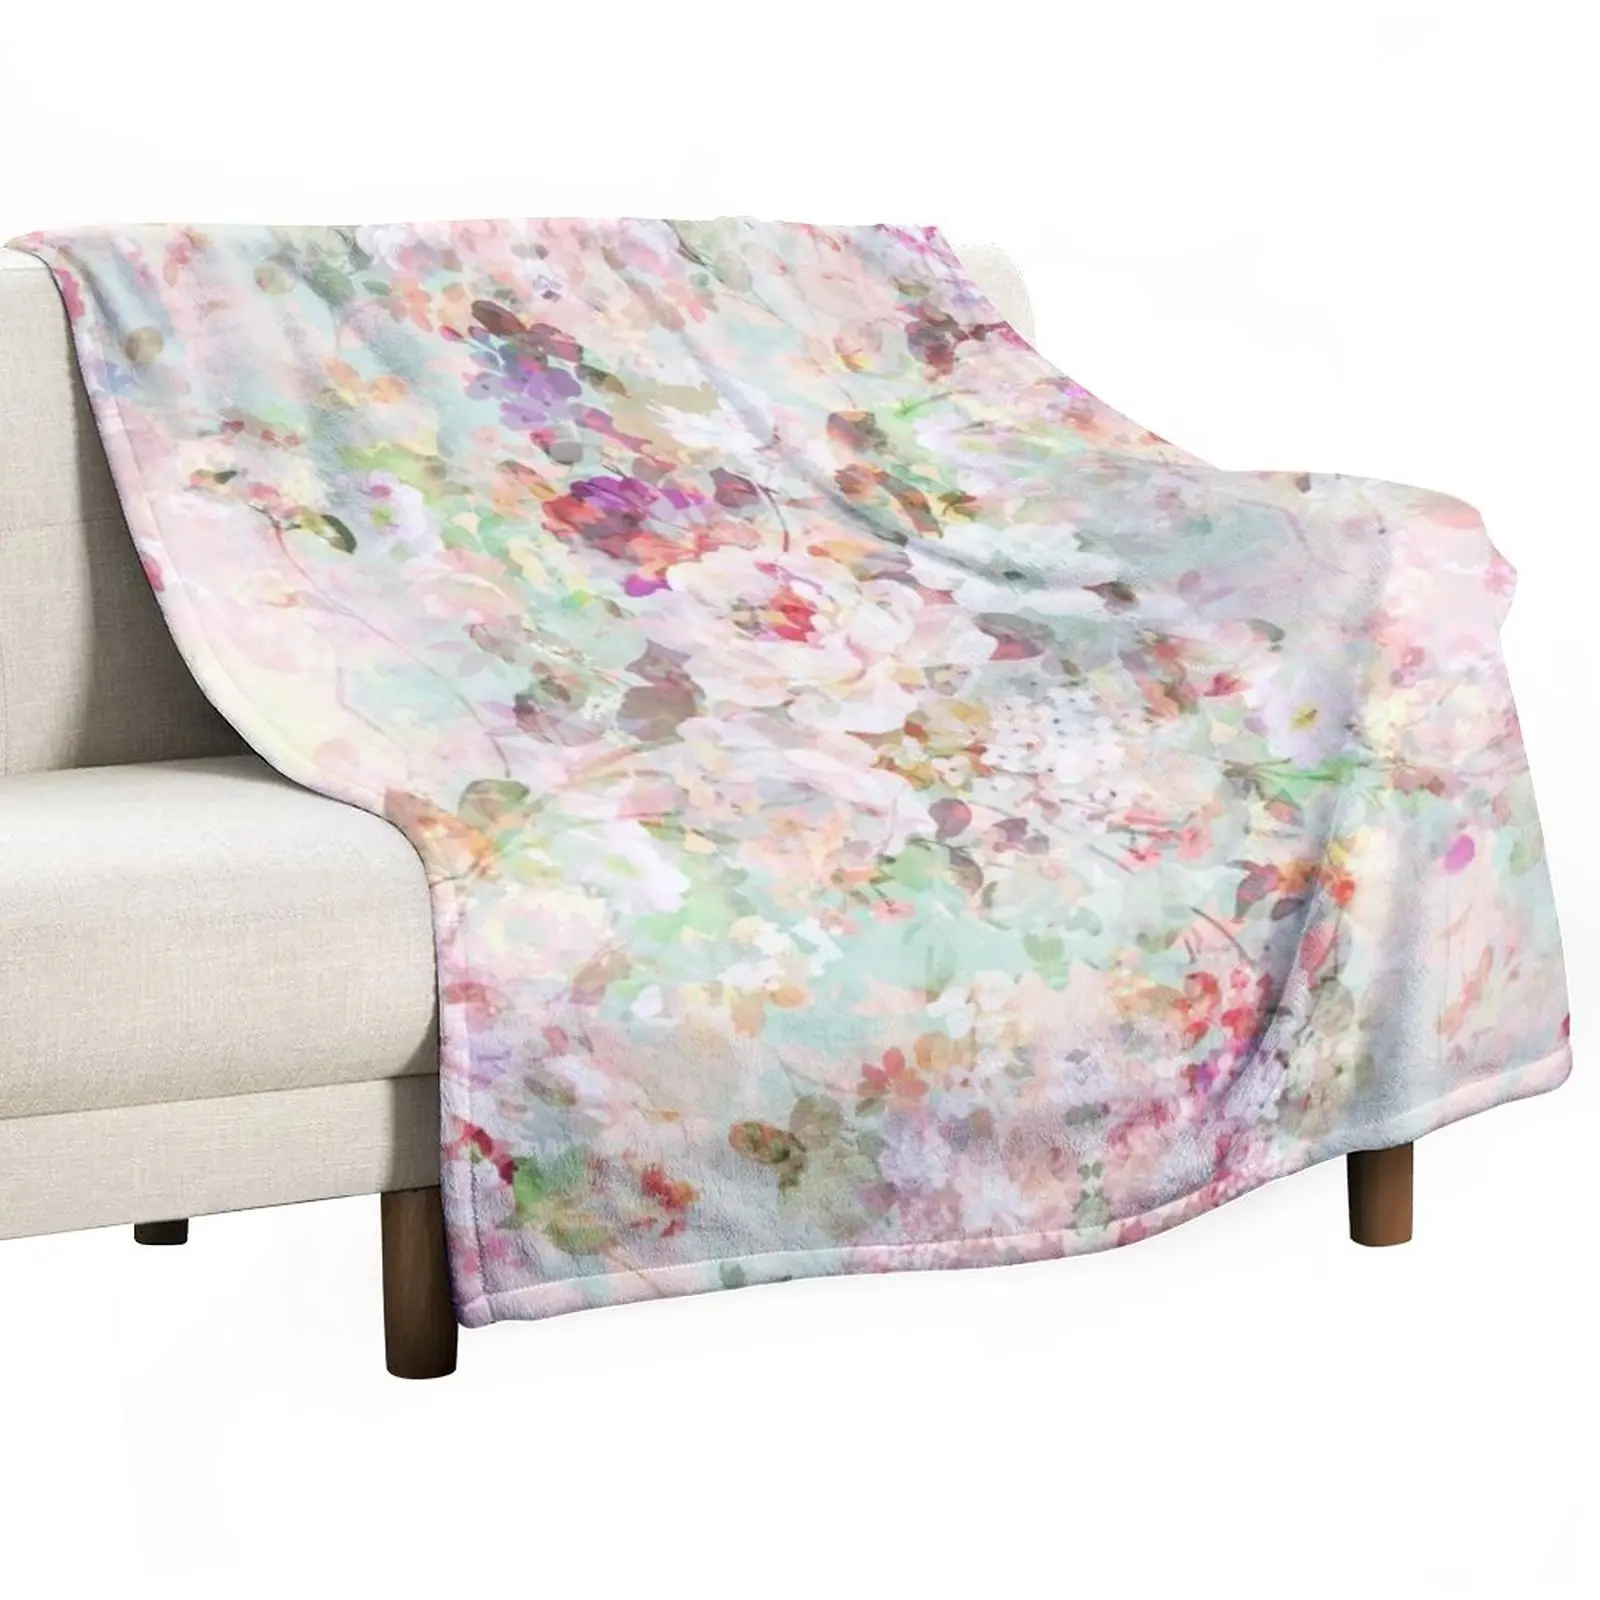 

Pink watercolor vintage flowers pattern Throw Blanket Decorative Sofa Blankets Blankets For Sofas